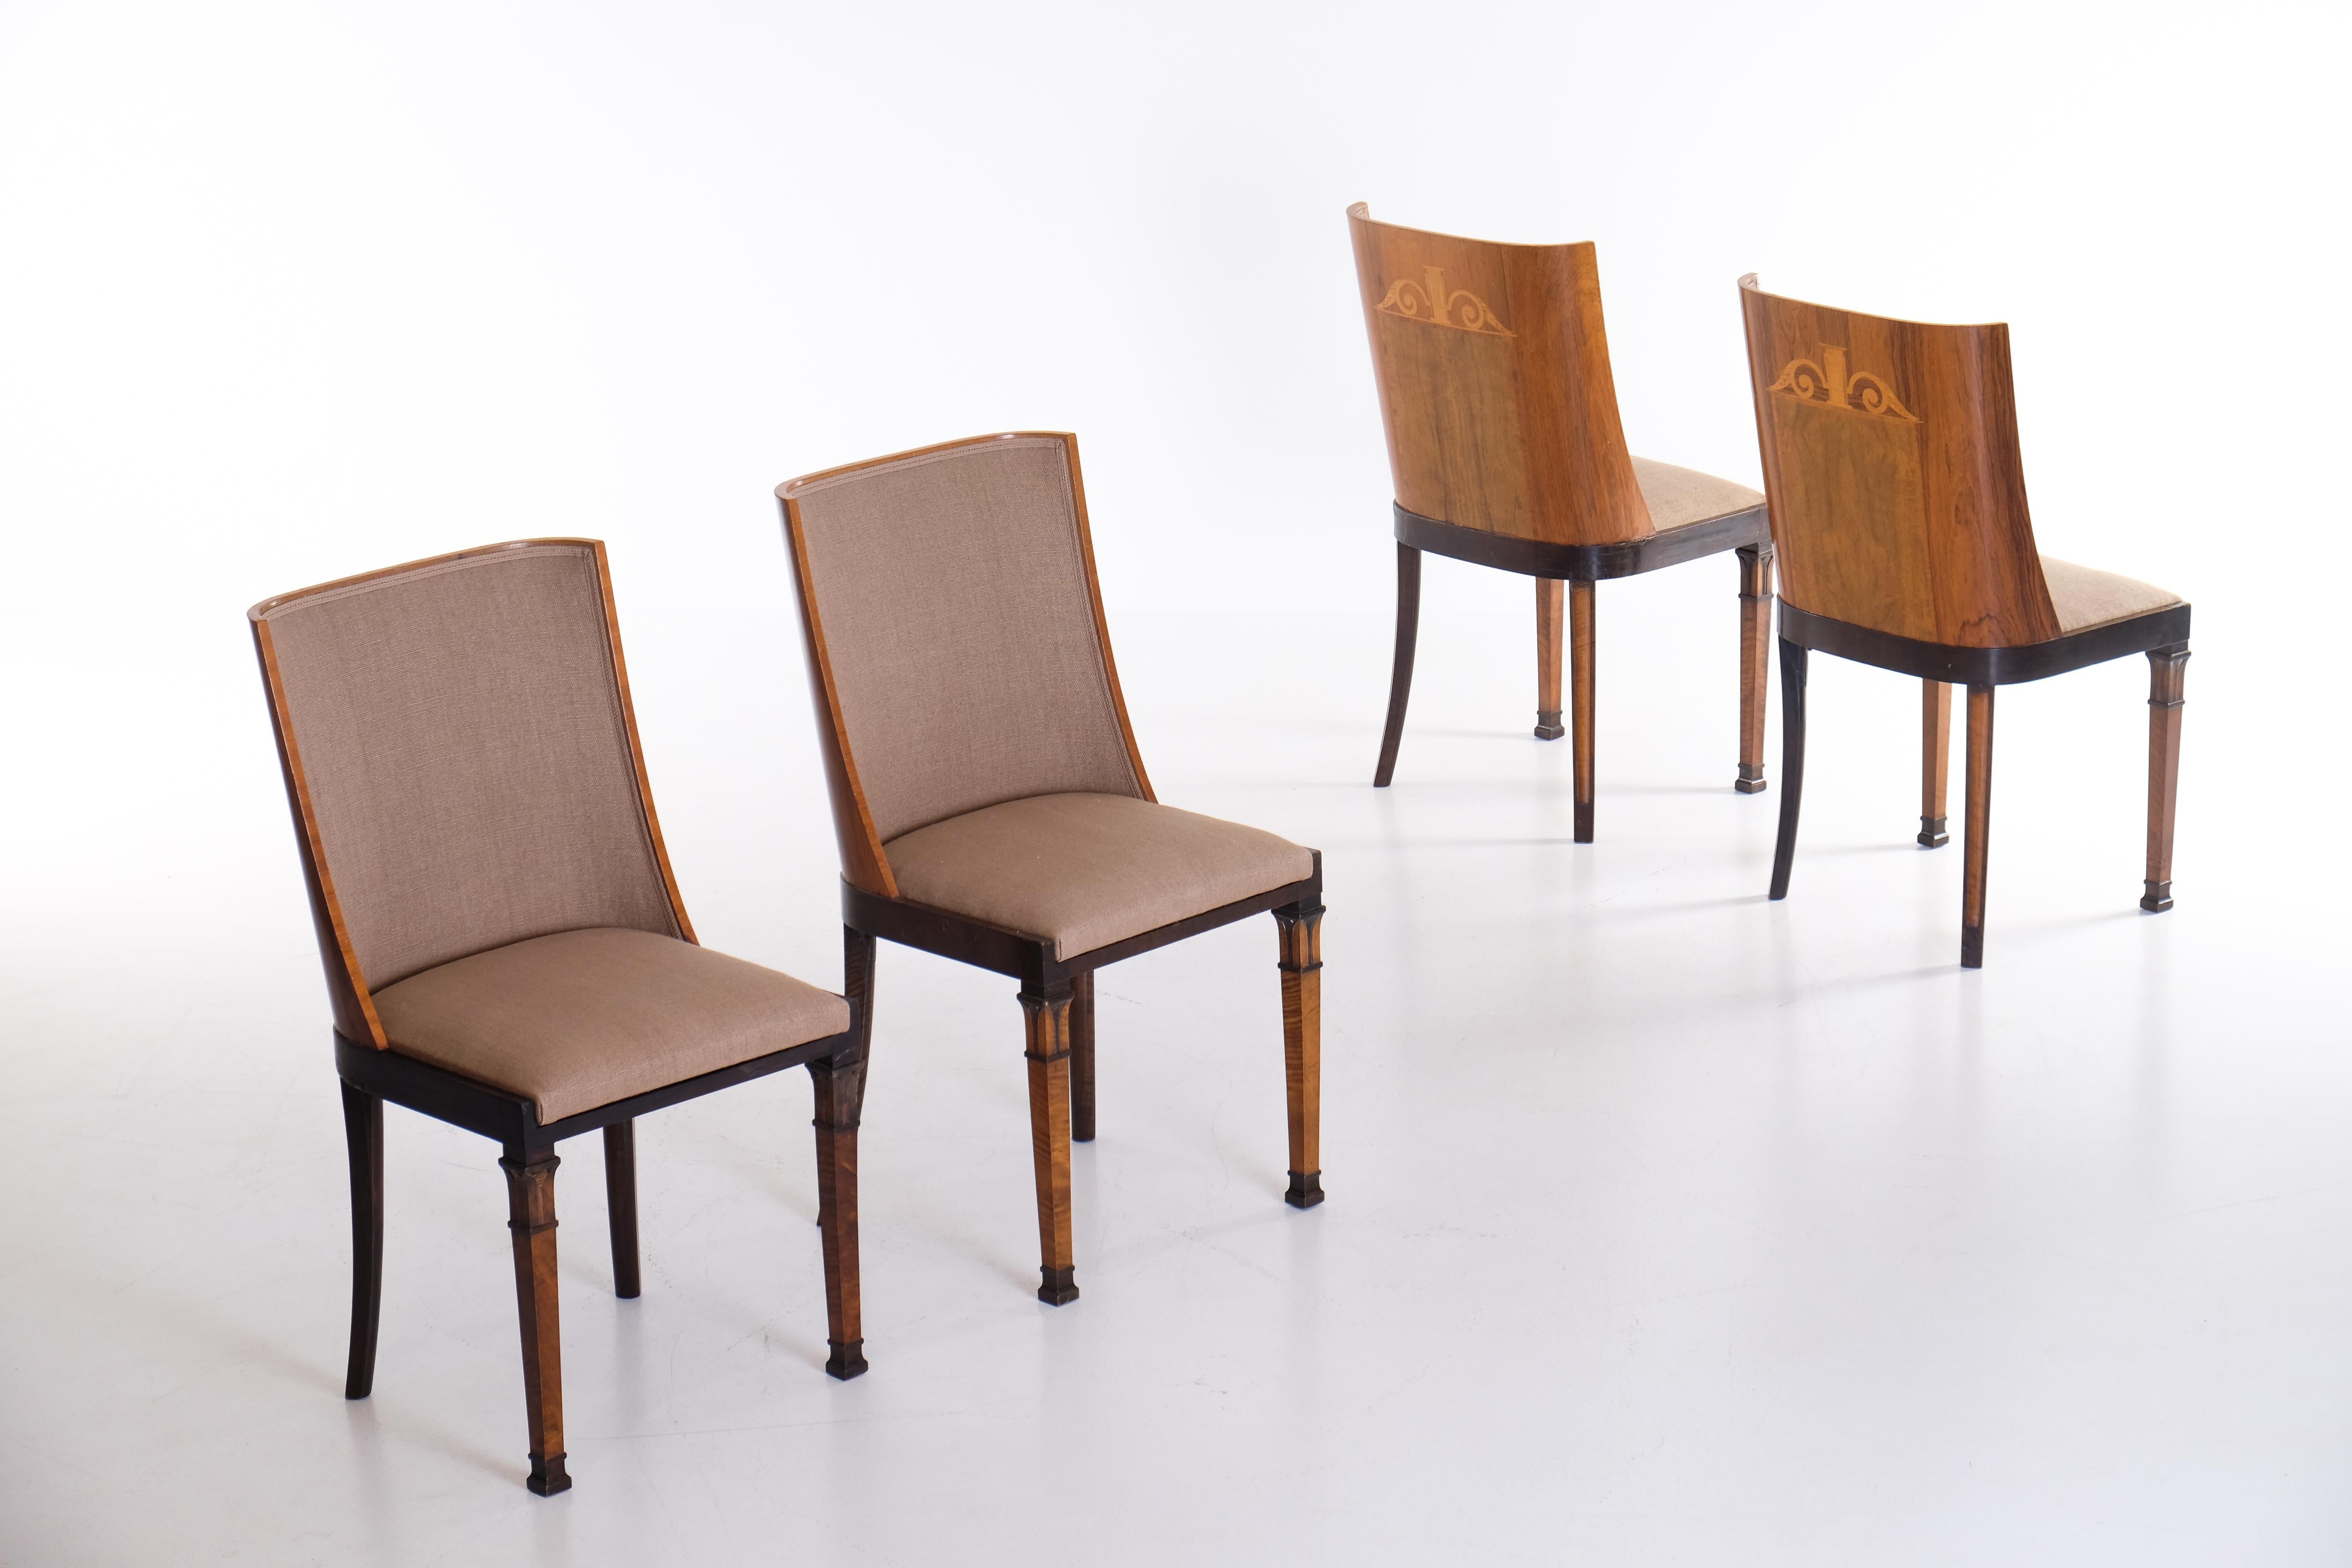 Set of 4 Chairs Attributed to Carl Bergsten, Sweden, 1920s For Sale 3